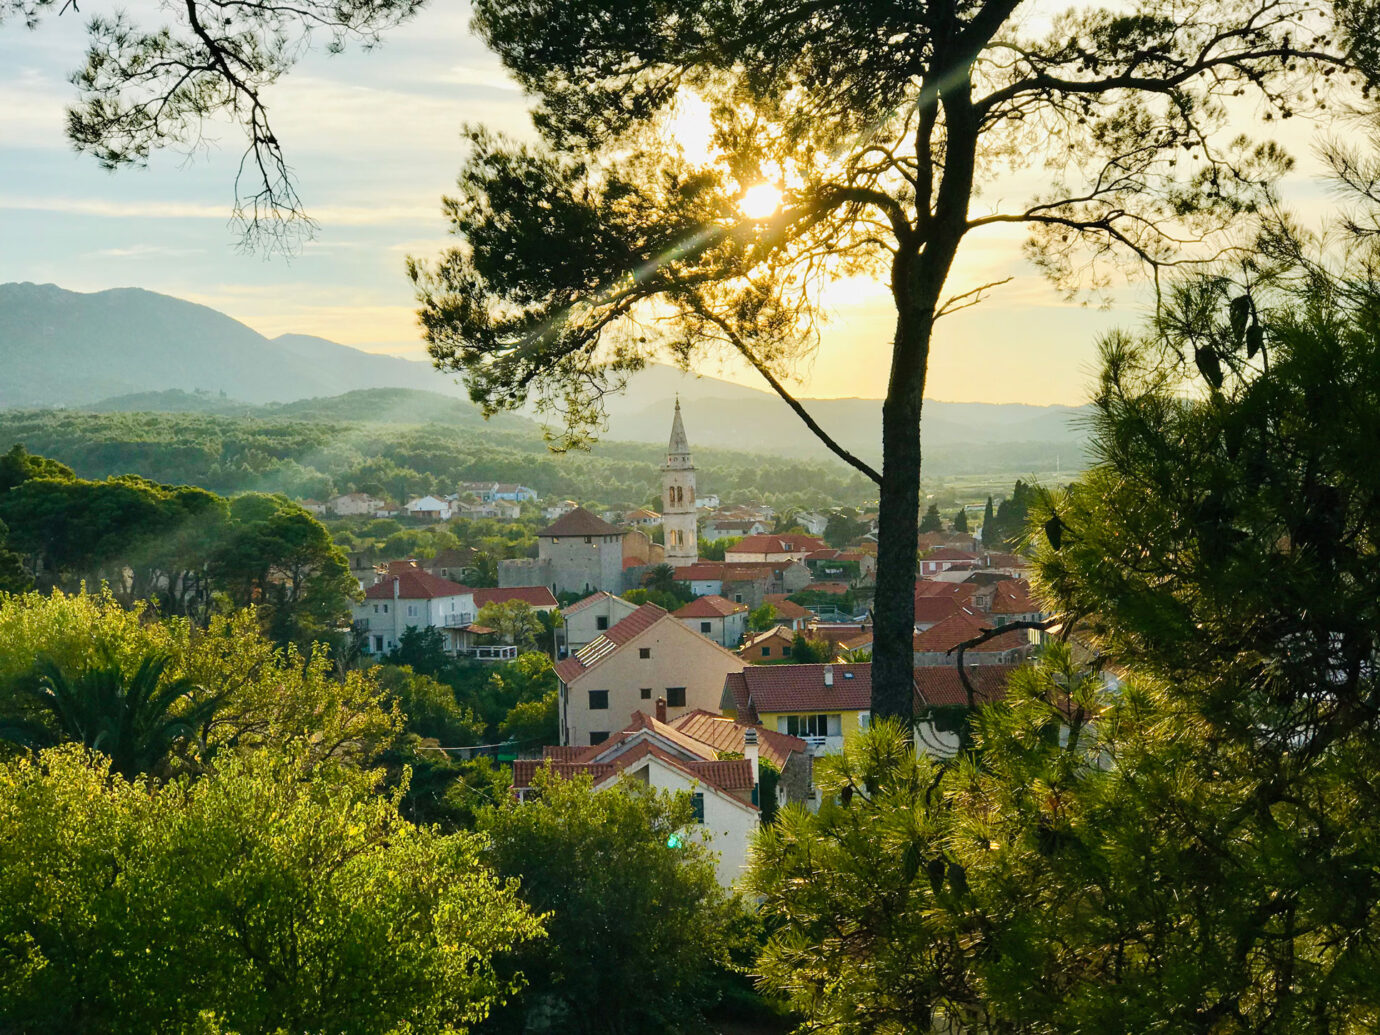 View of the village of Hvar just before sunset